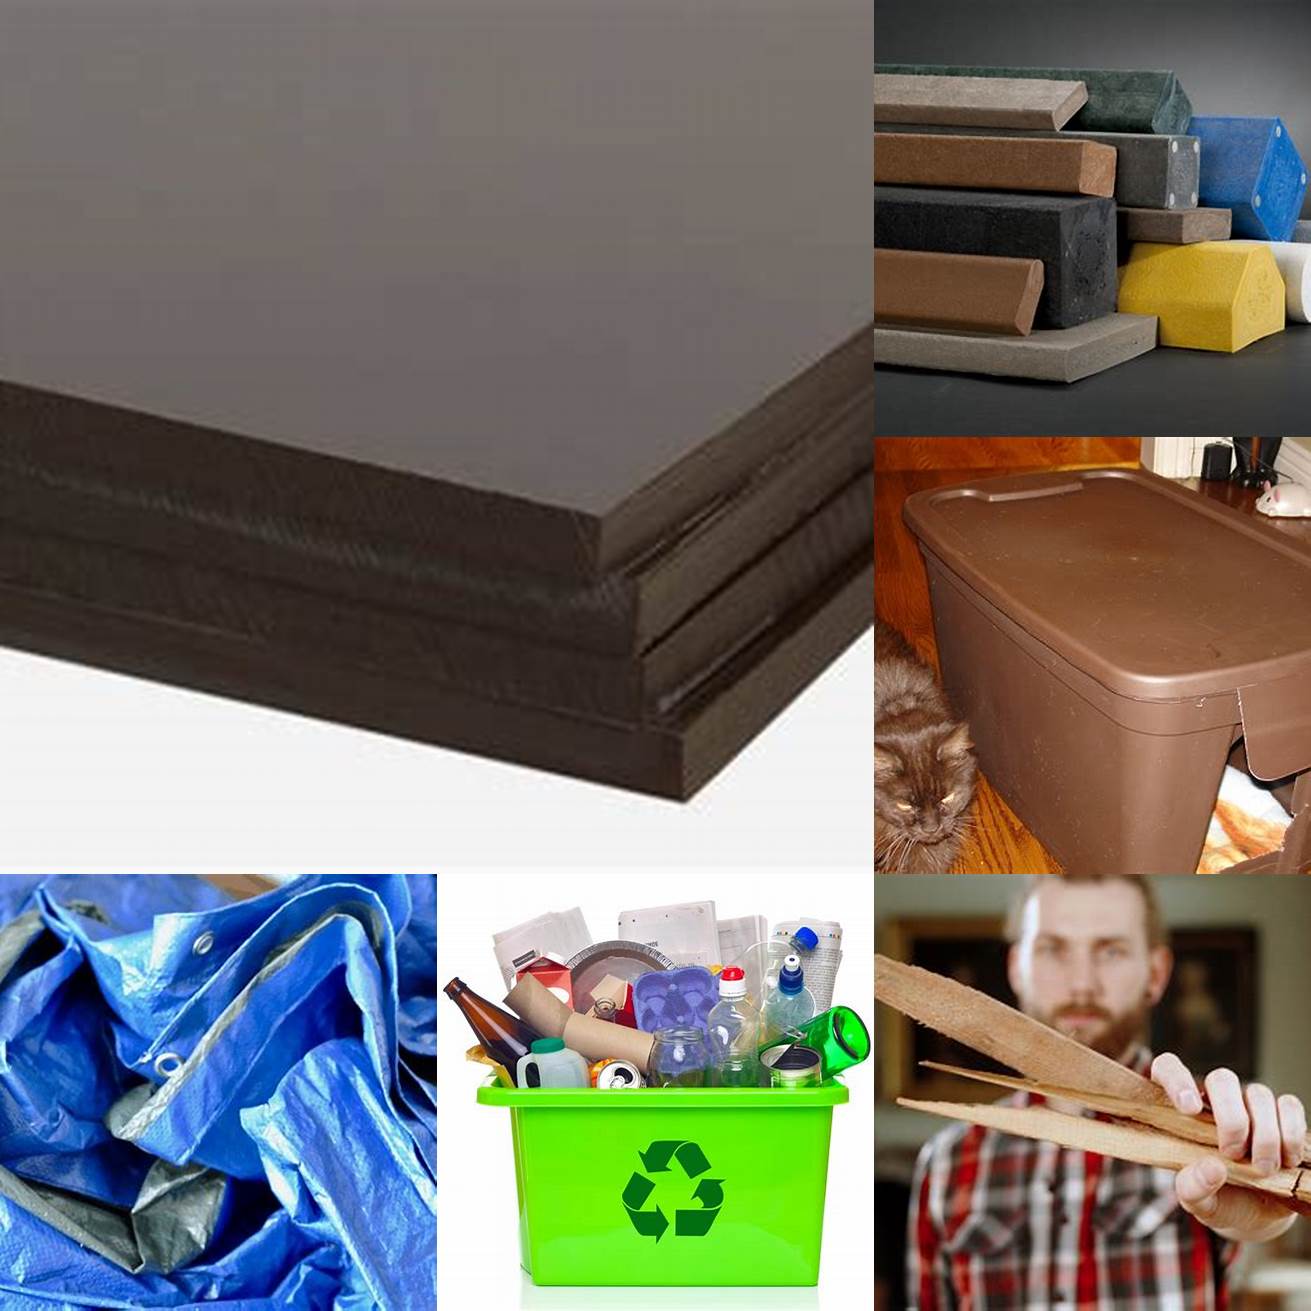 Material Choose a material that is durable and easy to clean such as wood or plastic